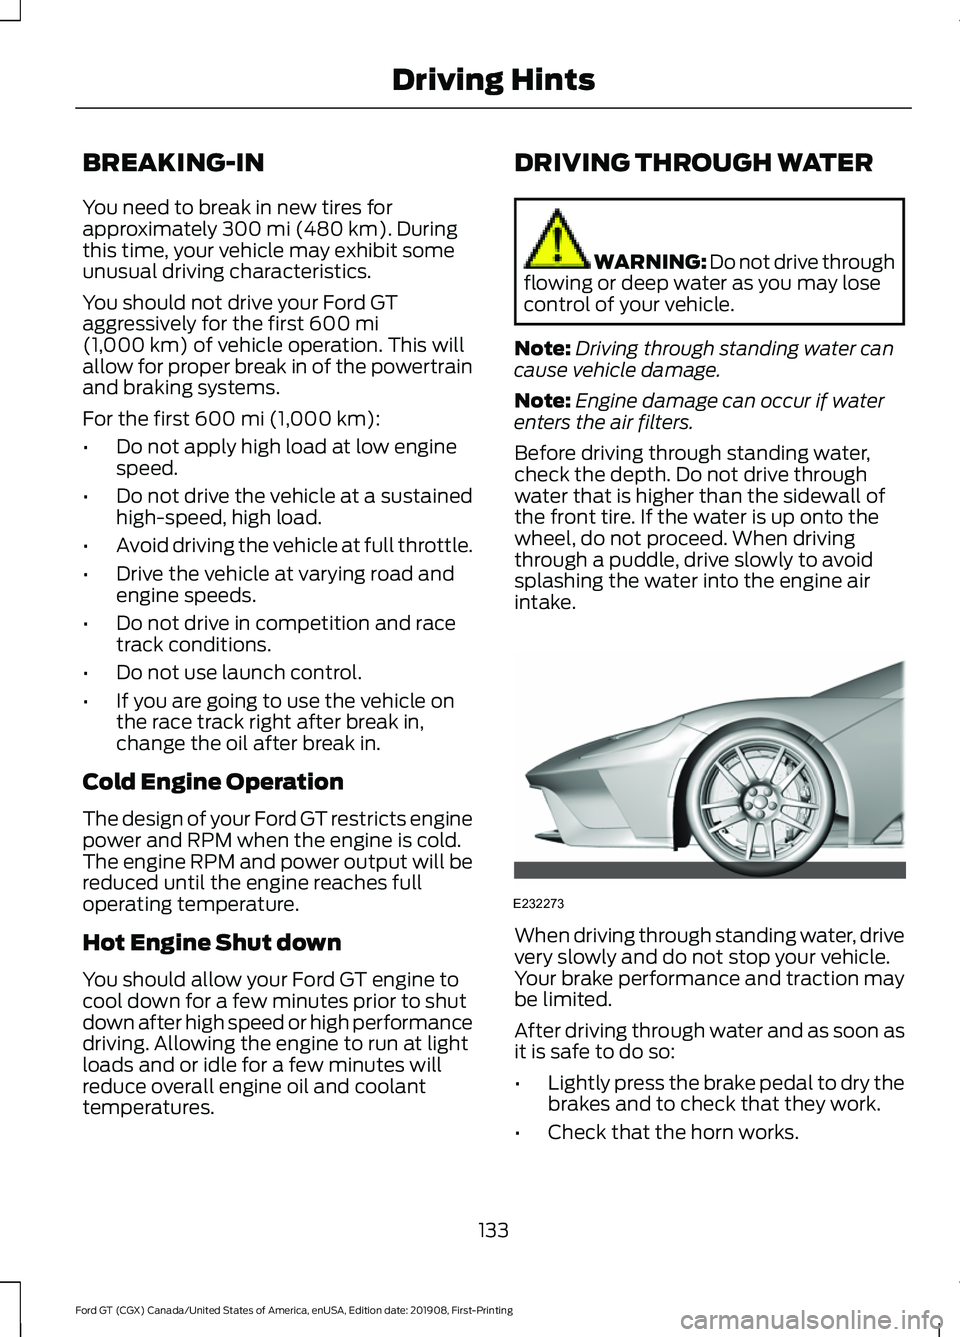 FORD GT 2020  Owners Manual BREAKING-IN
You need to break in new tires for
approximately 300 mi (480 km). During
this time, your vehicle may exhibit some
unusual driving characteristics.
You should not drive your Ford GT
aggress